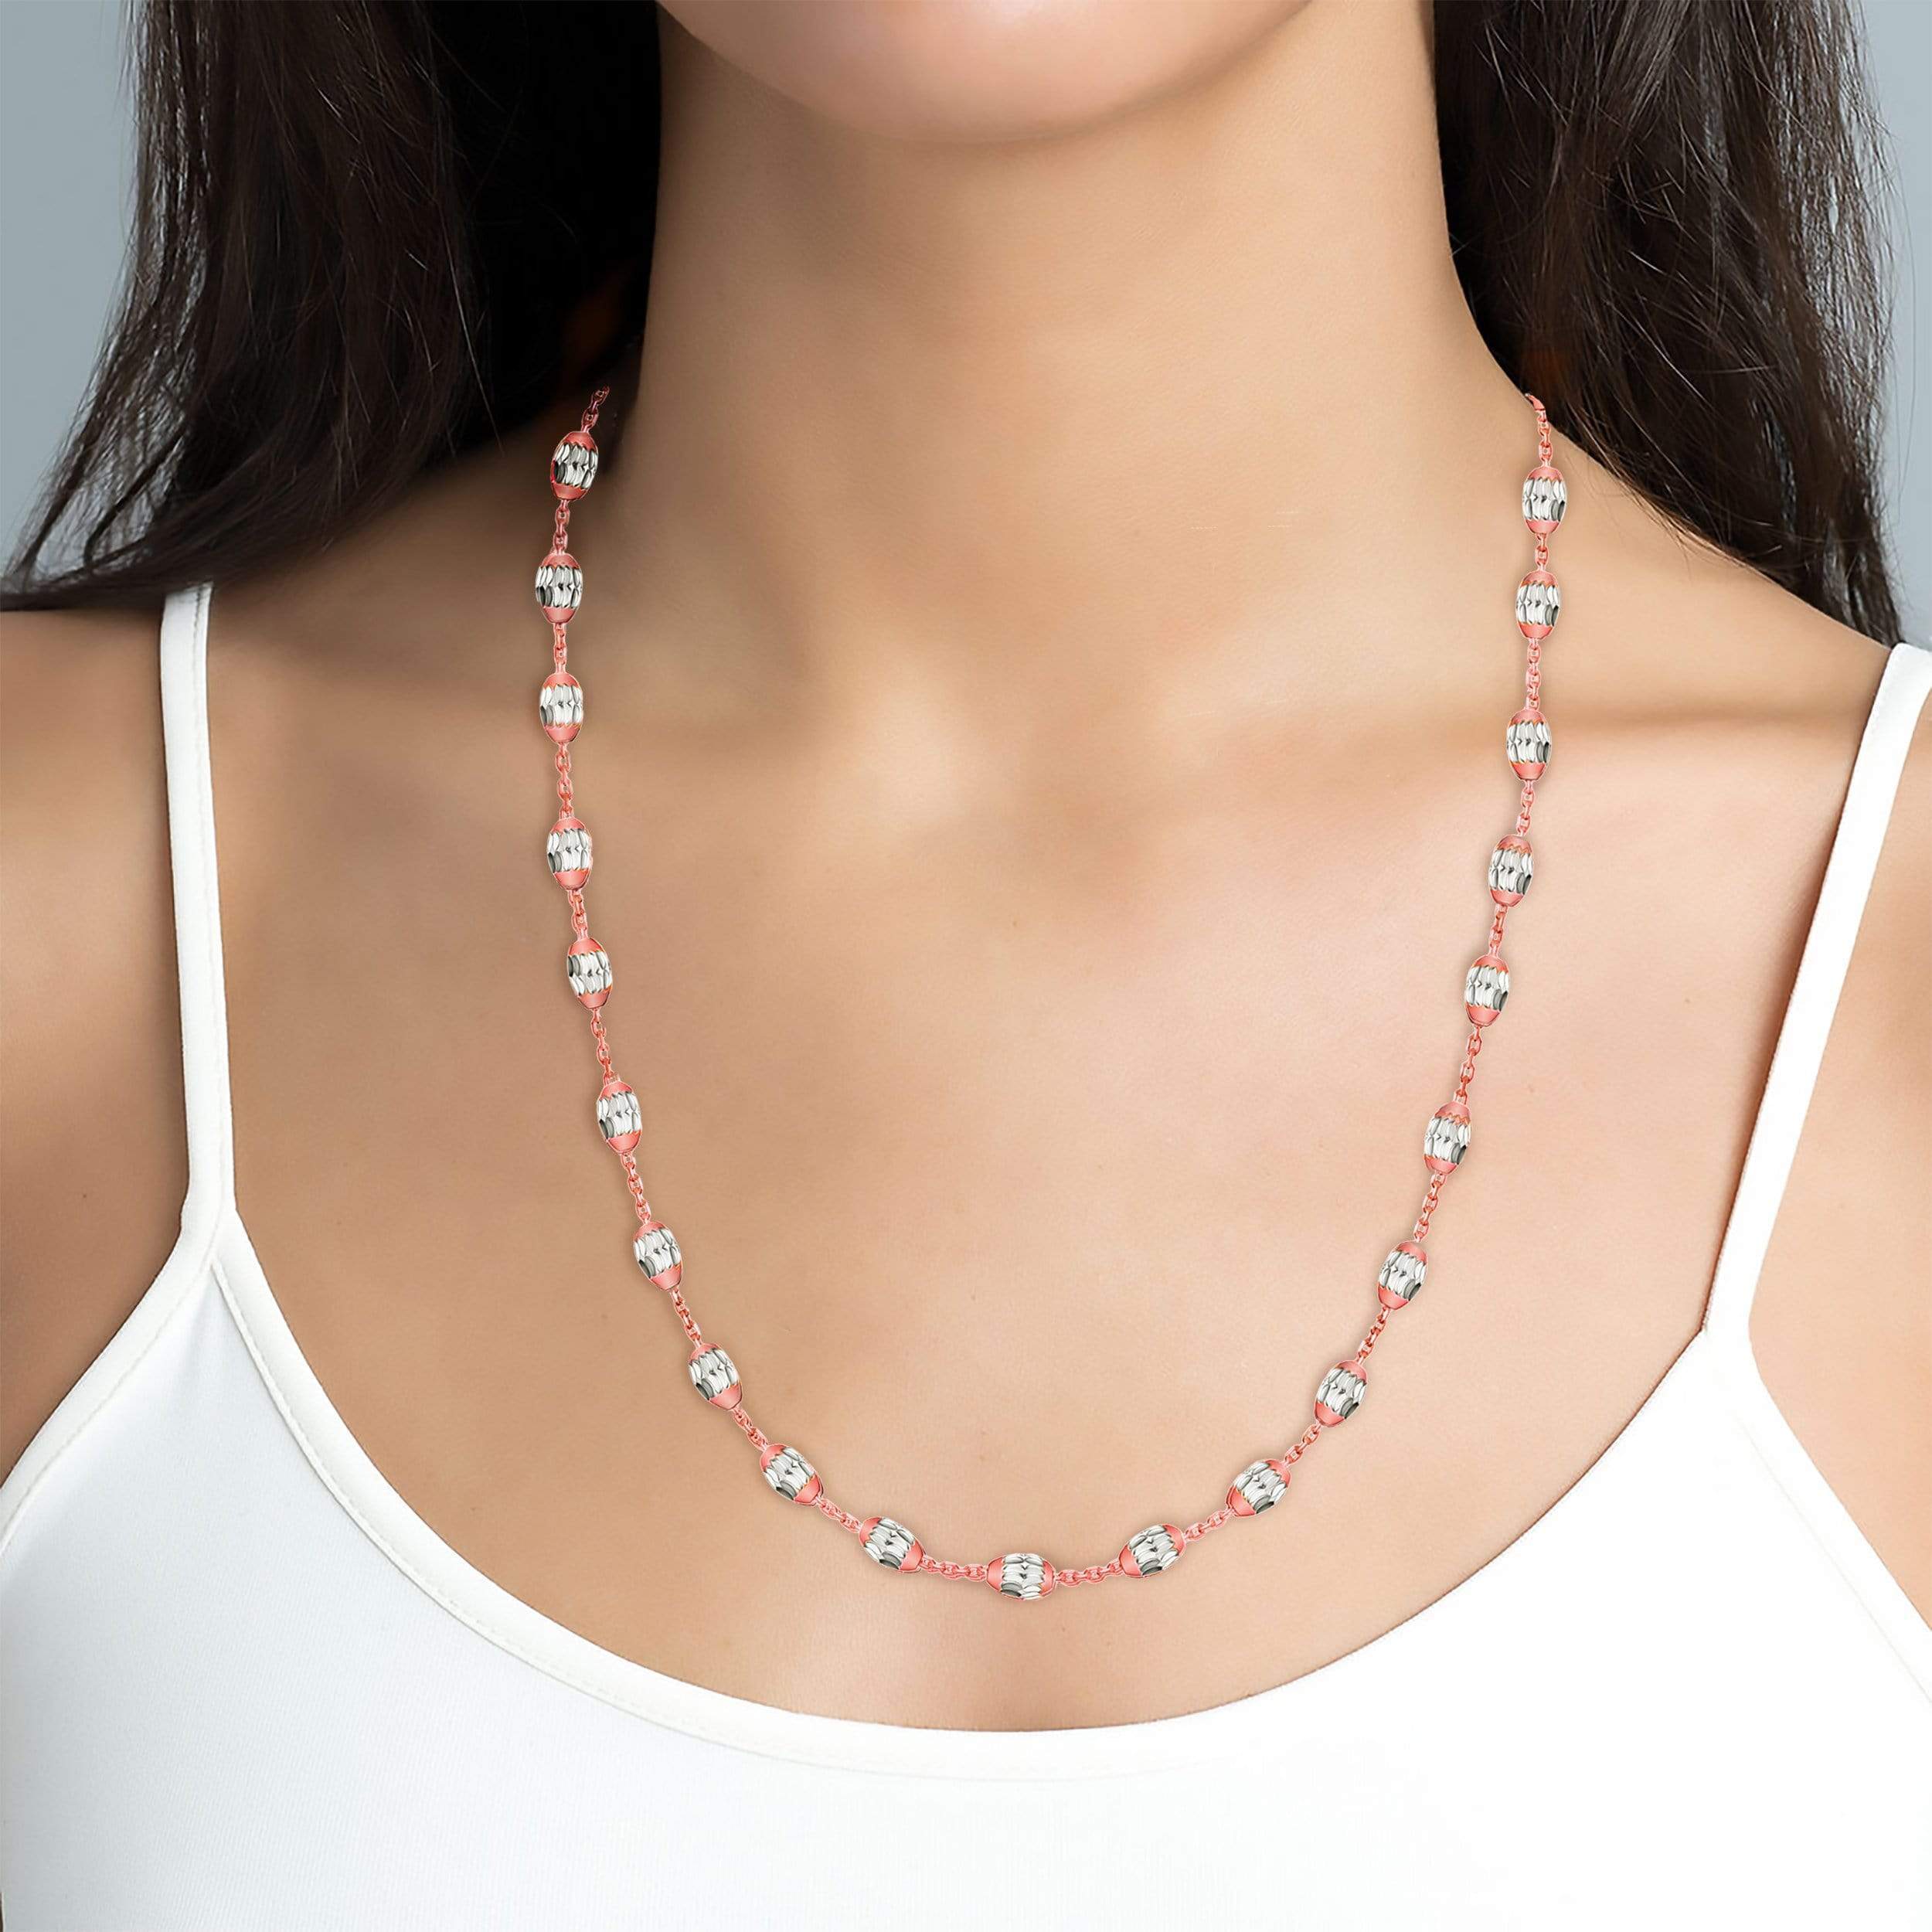 Lynora Jewellery Necklace 30" Geobeads Necklace Rose Gold Plate with Silver Beads